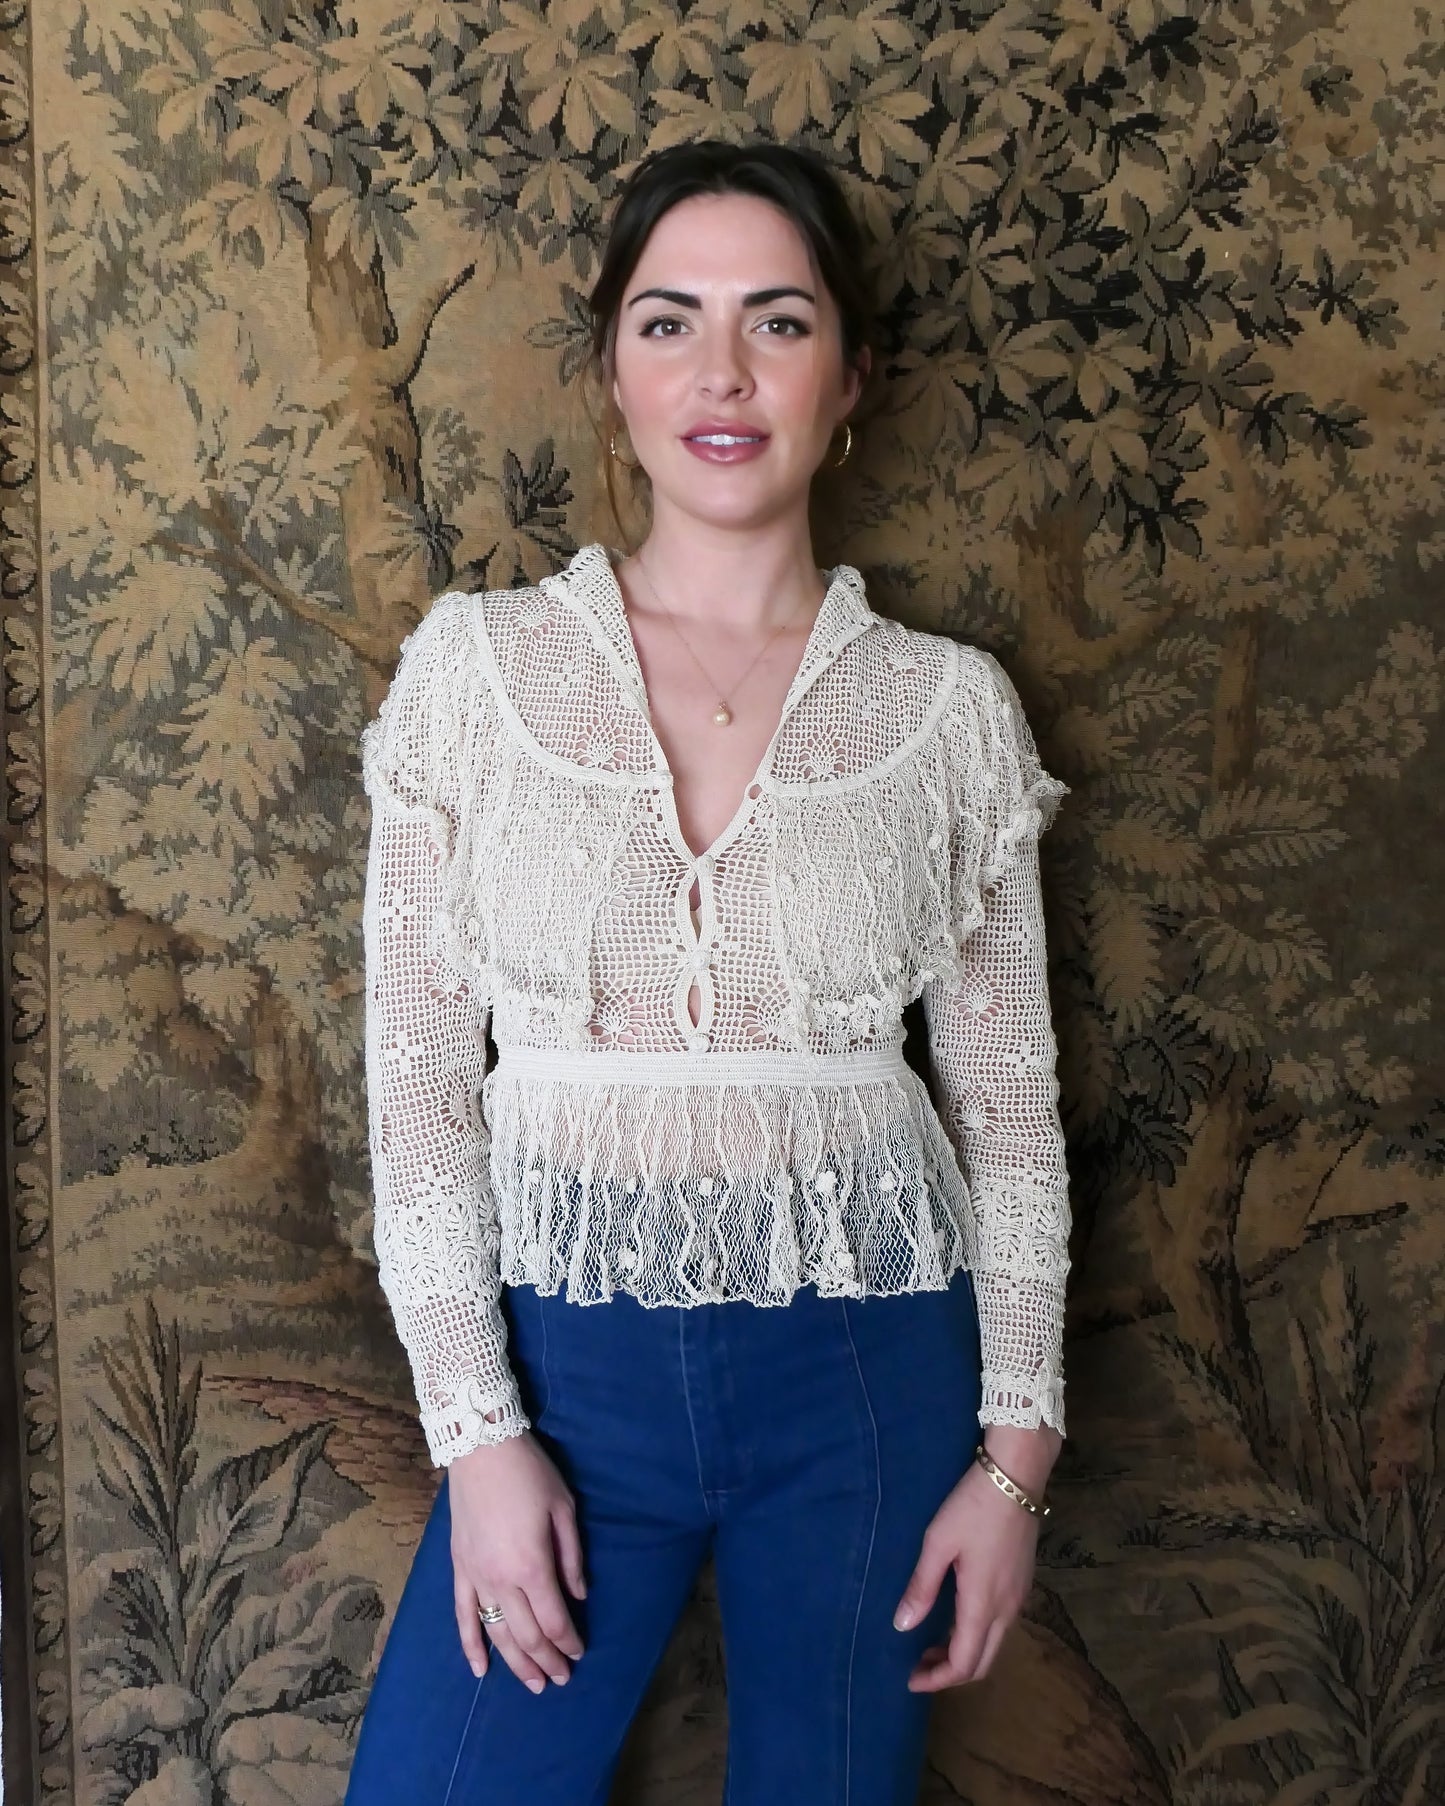 Photo of model wearing the top with buttons going up the front.  Lim's original crochet top from the 1980s. Slightly thicker threads were used to crochet the body of the top, and very fine threads give the ruffled parts a lightweight, feminine touch. High Victorian neckline, a beautiful, intricate trim on the sleeves and chest, and a fitted waist and flared hem to create a flattering silhouette.  The top is reversible and can be worn with the buttons going down the front or back. T